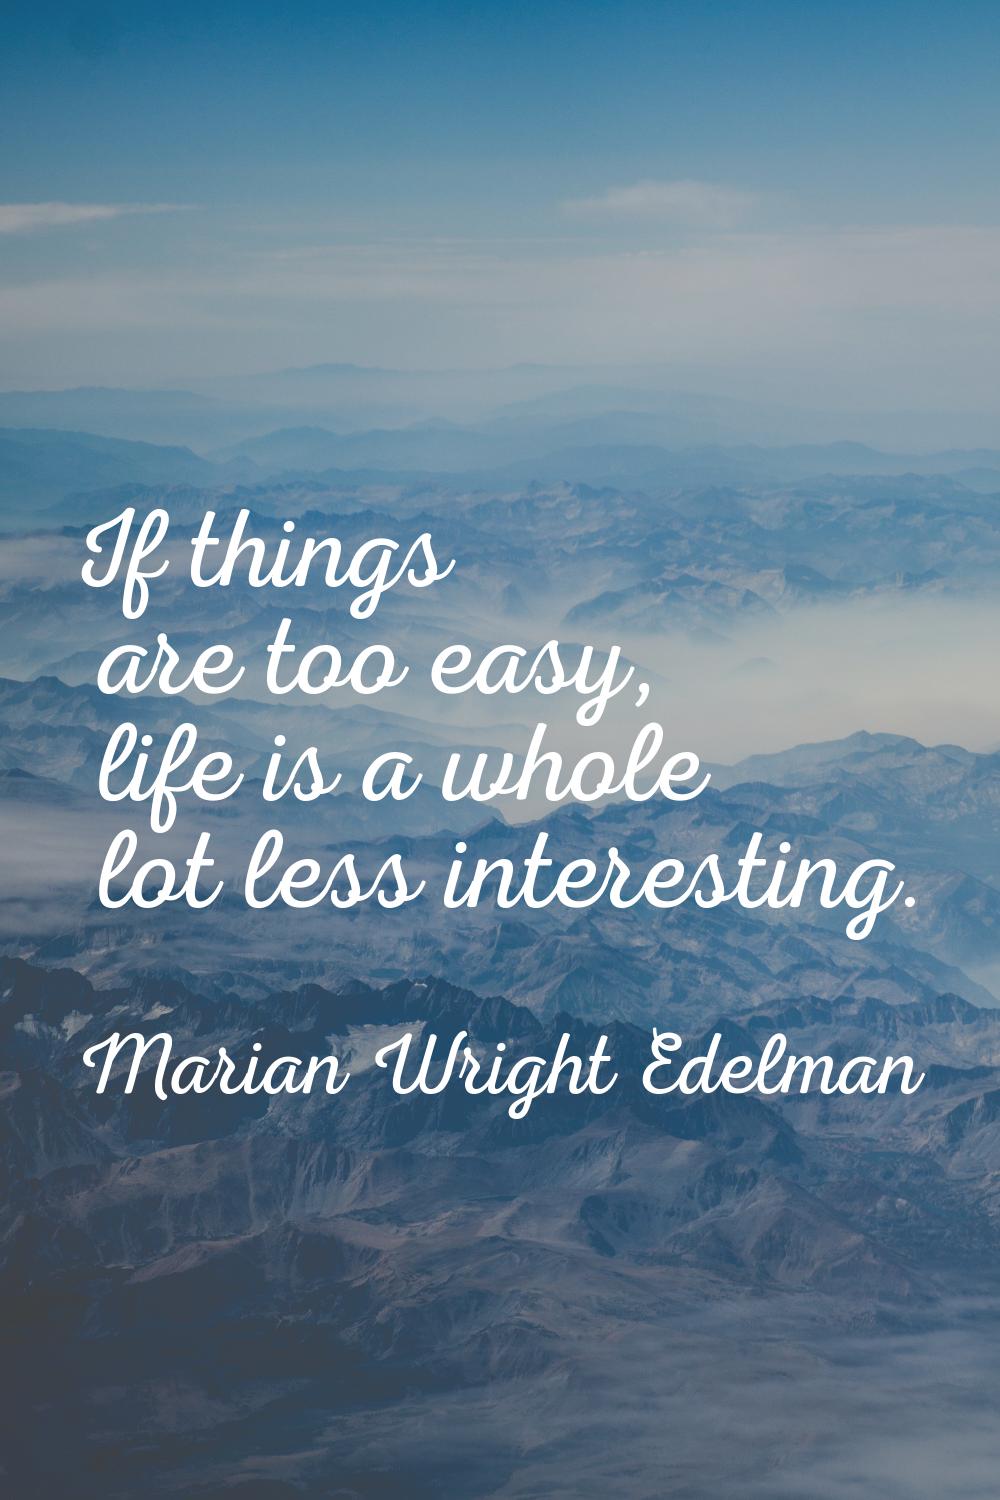 If things are too easy, life is a whole lot less interesting.